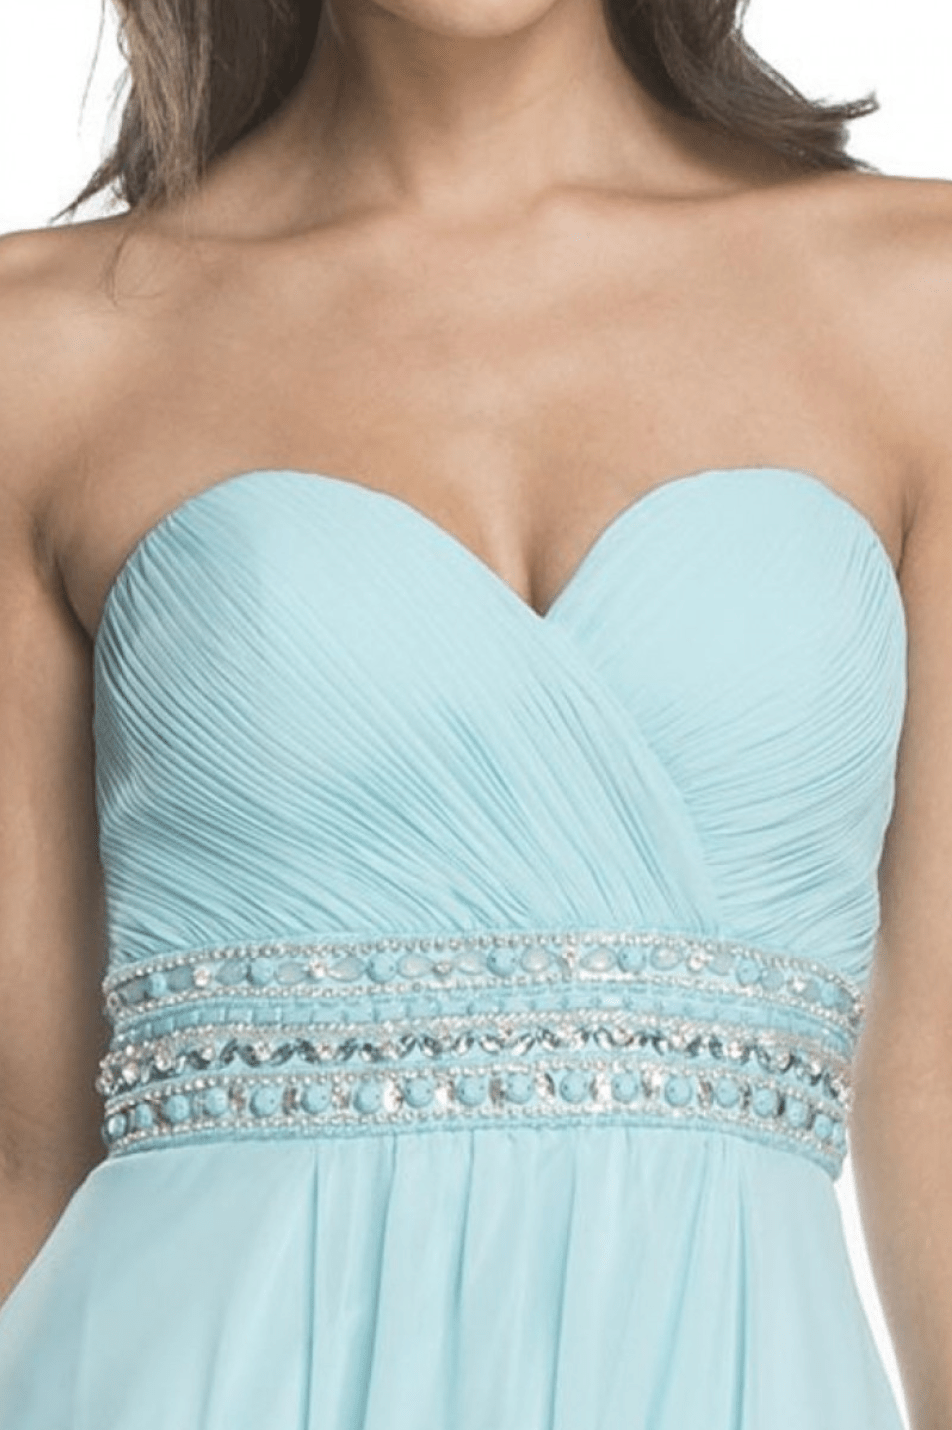 Strapless Crystal Beaded Chiffon Dress by Aspeed - NORMA REED